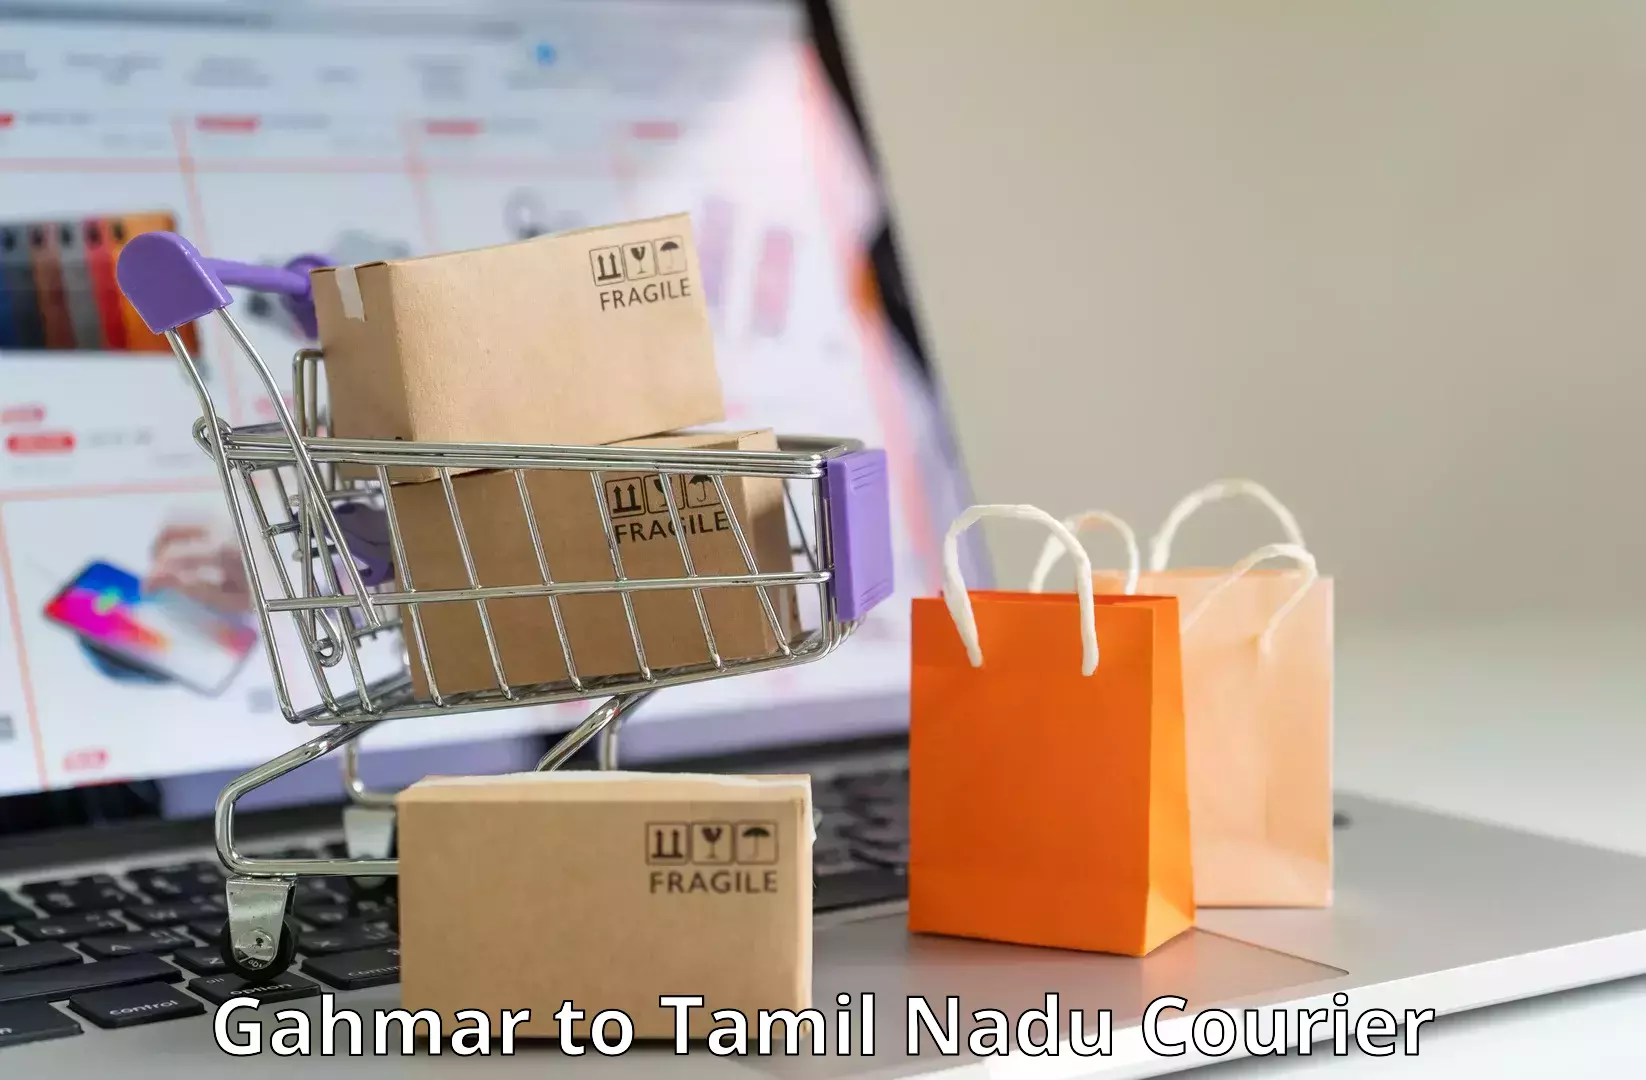 Residential courier service Gahmar to Tindivanam